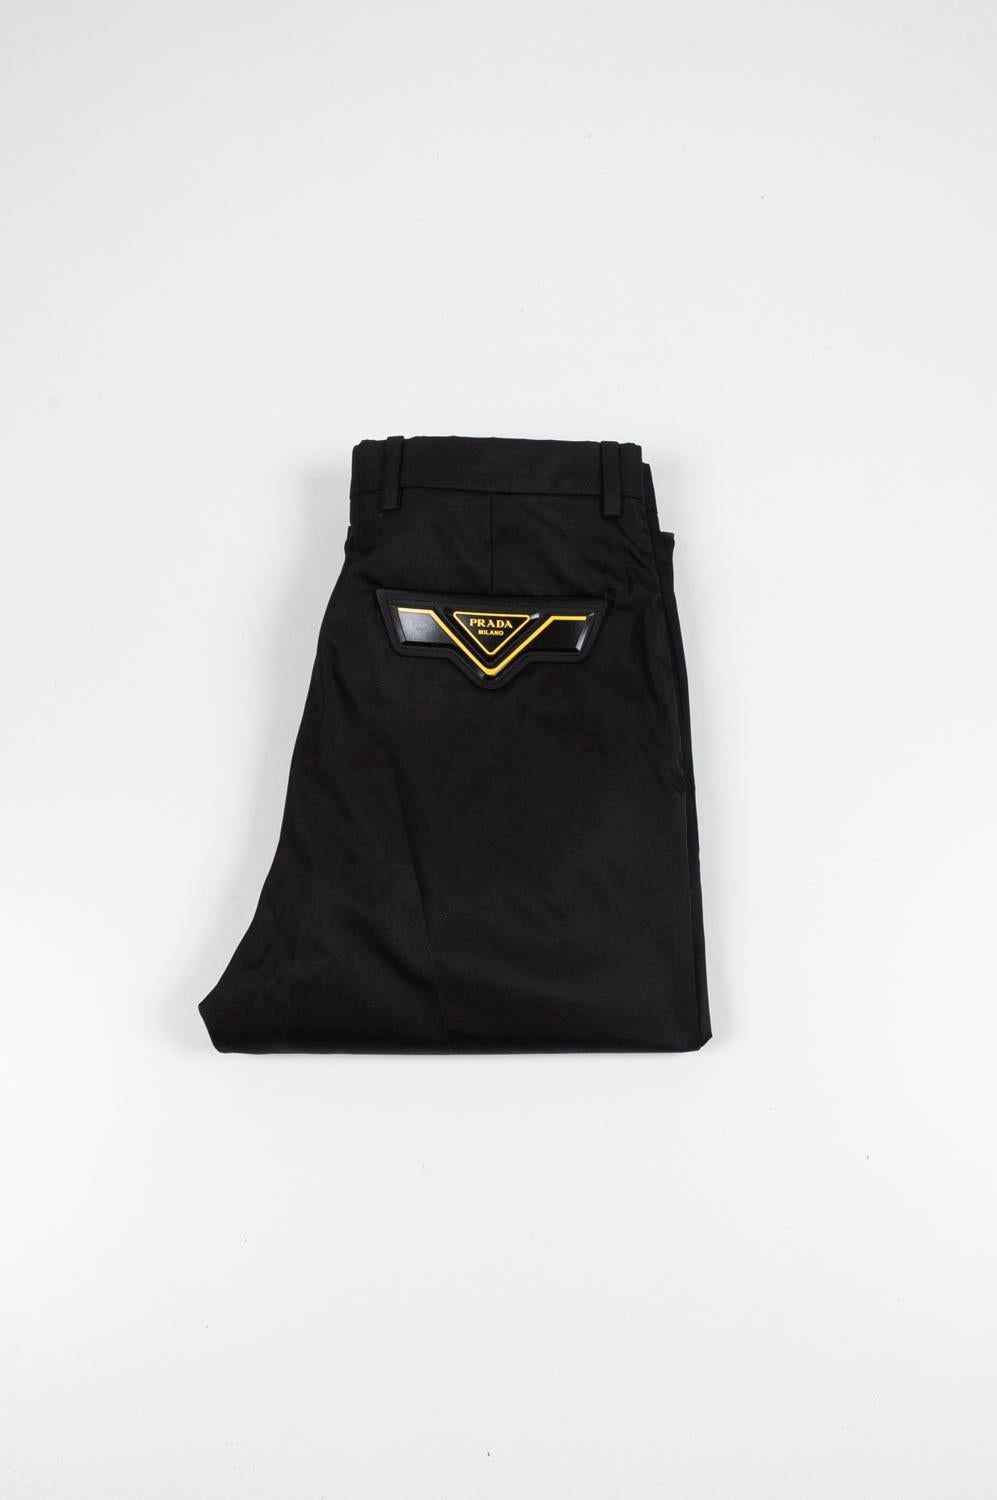 Item for sale is 100% genuine Prada Men RE-NYLON Pants, S317
Color: Black
(An actual color may a bit vary due to individual computer screen interpretation)
Material: 100% polyamide
Tag size: ITA46 (S/M)
These pants are great quality item. Rate 8.5